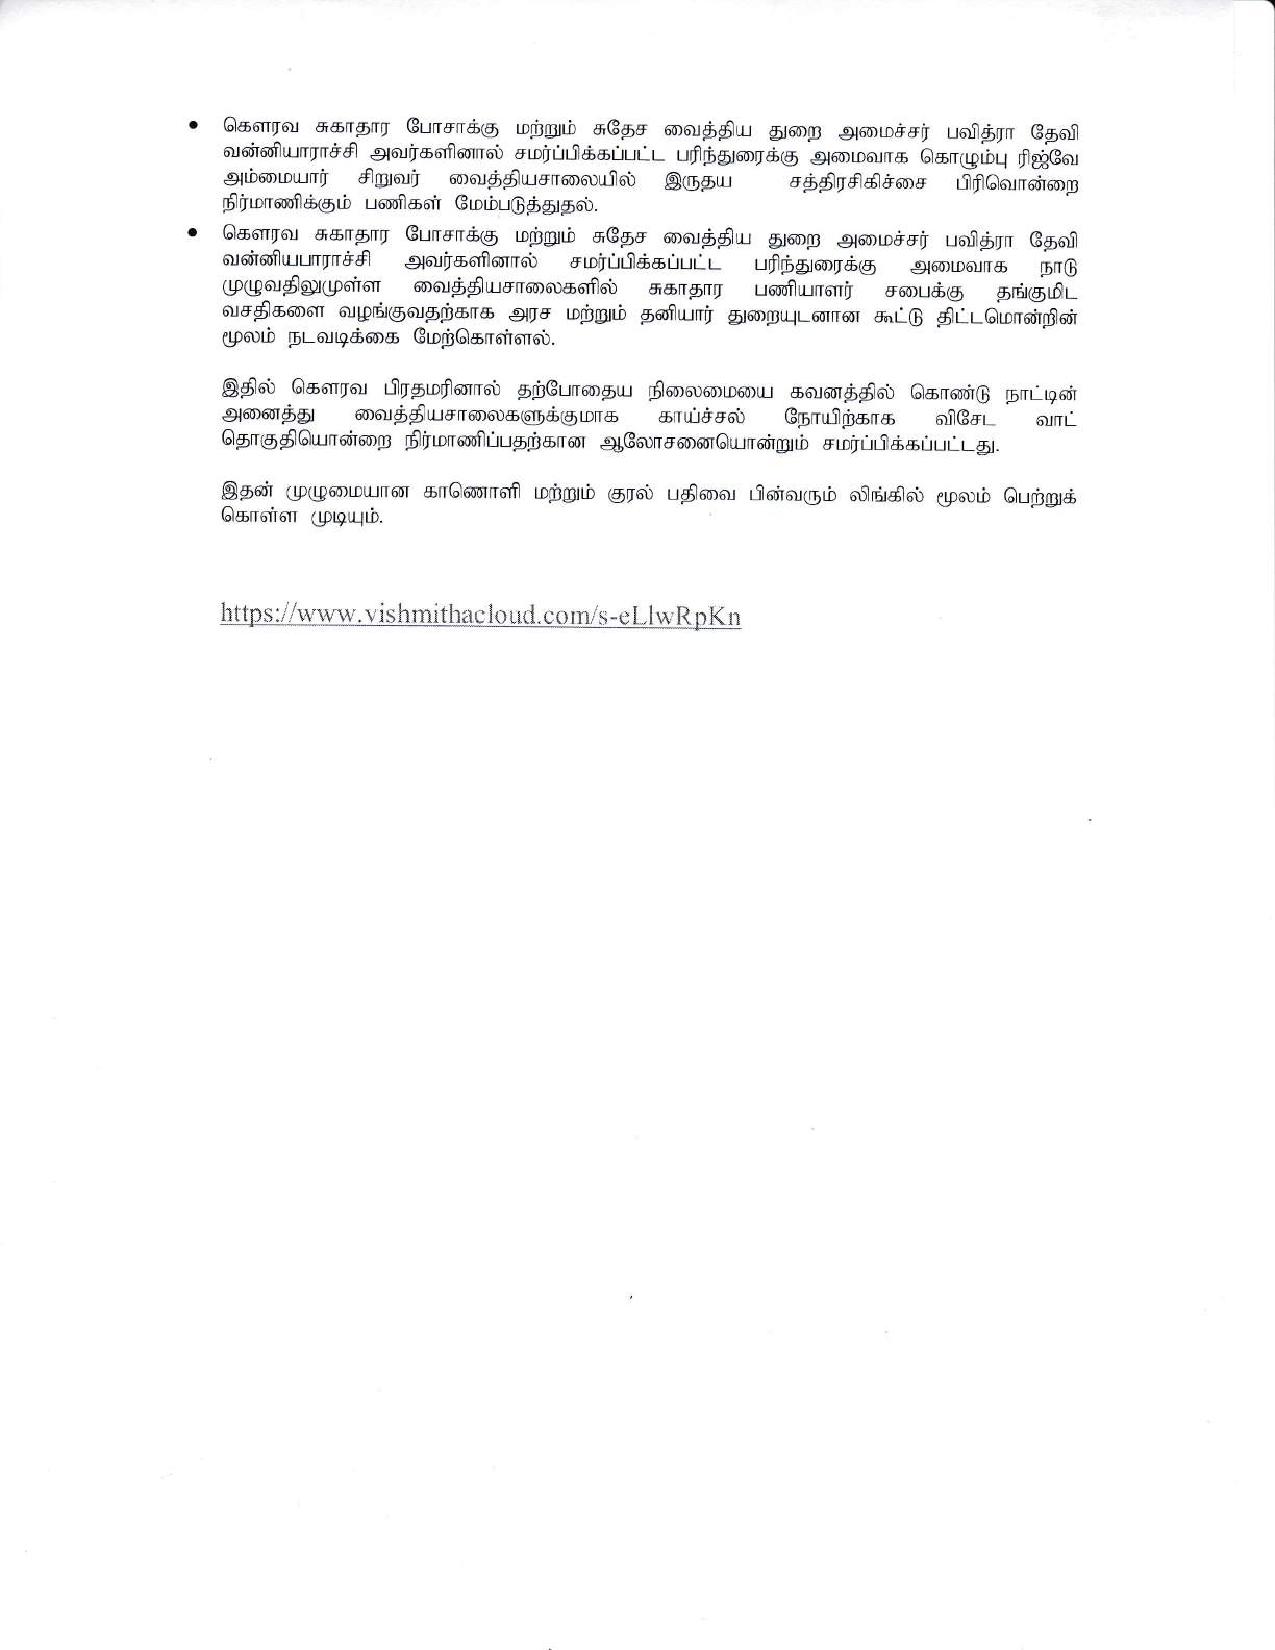 Cabinet Decisions 20.05.2020 Tamil compressed page 003